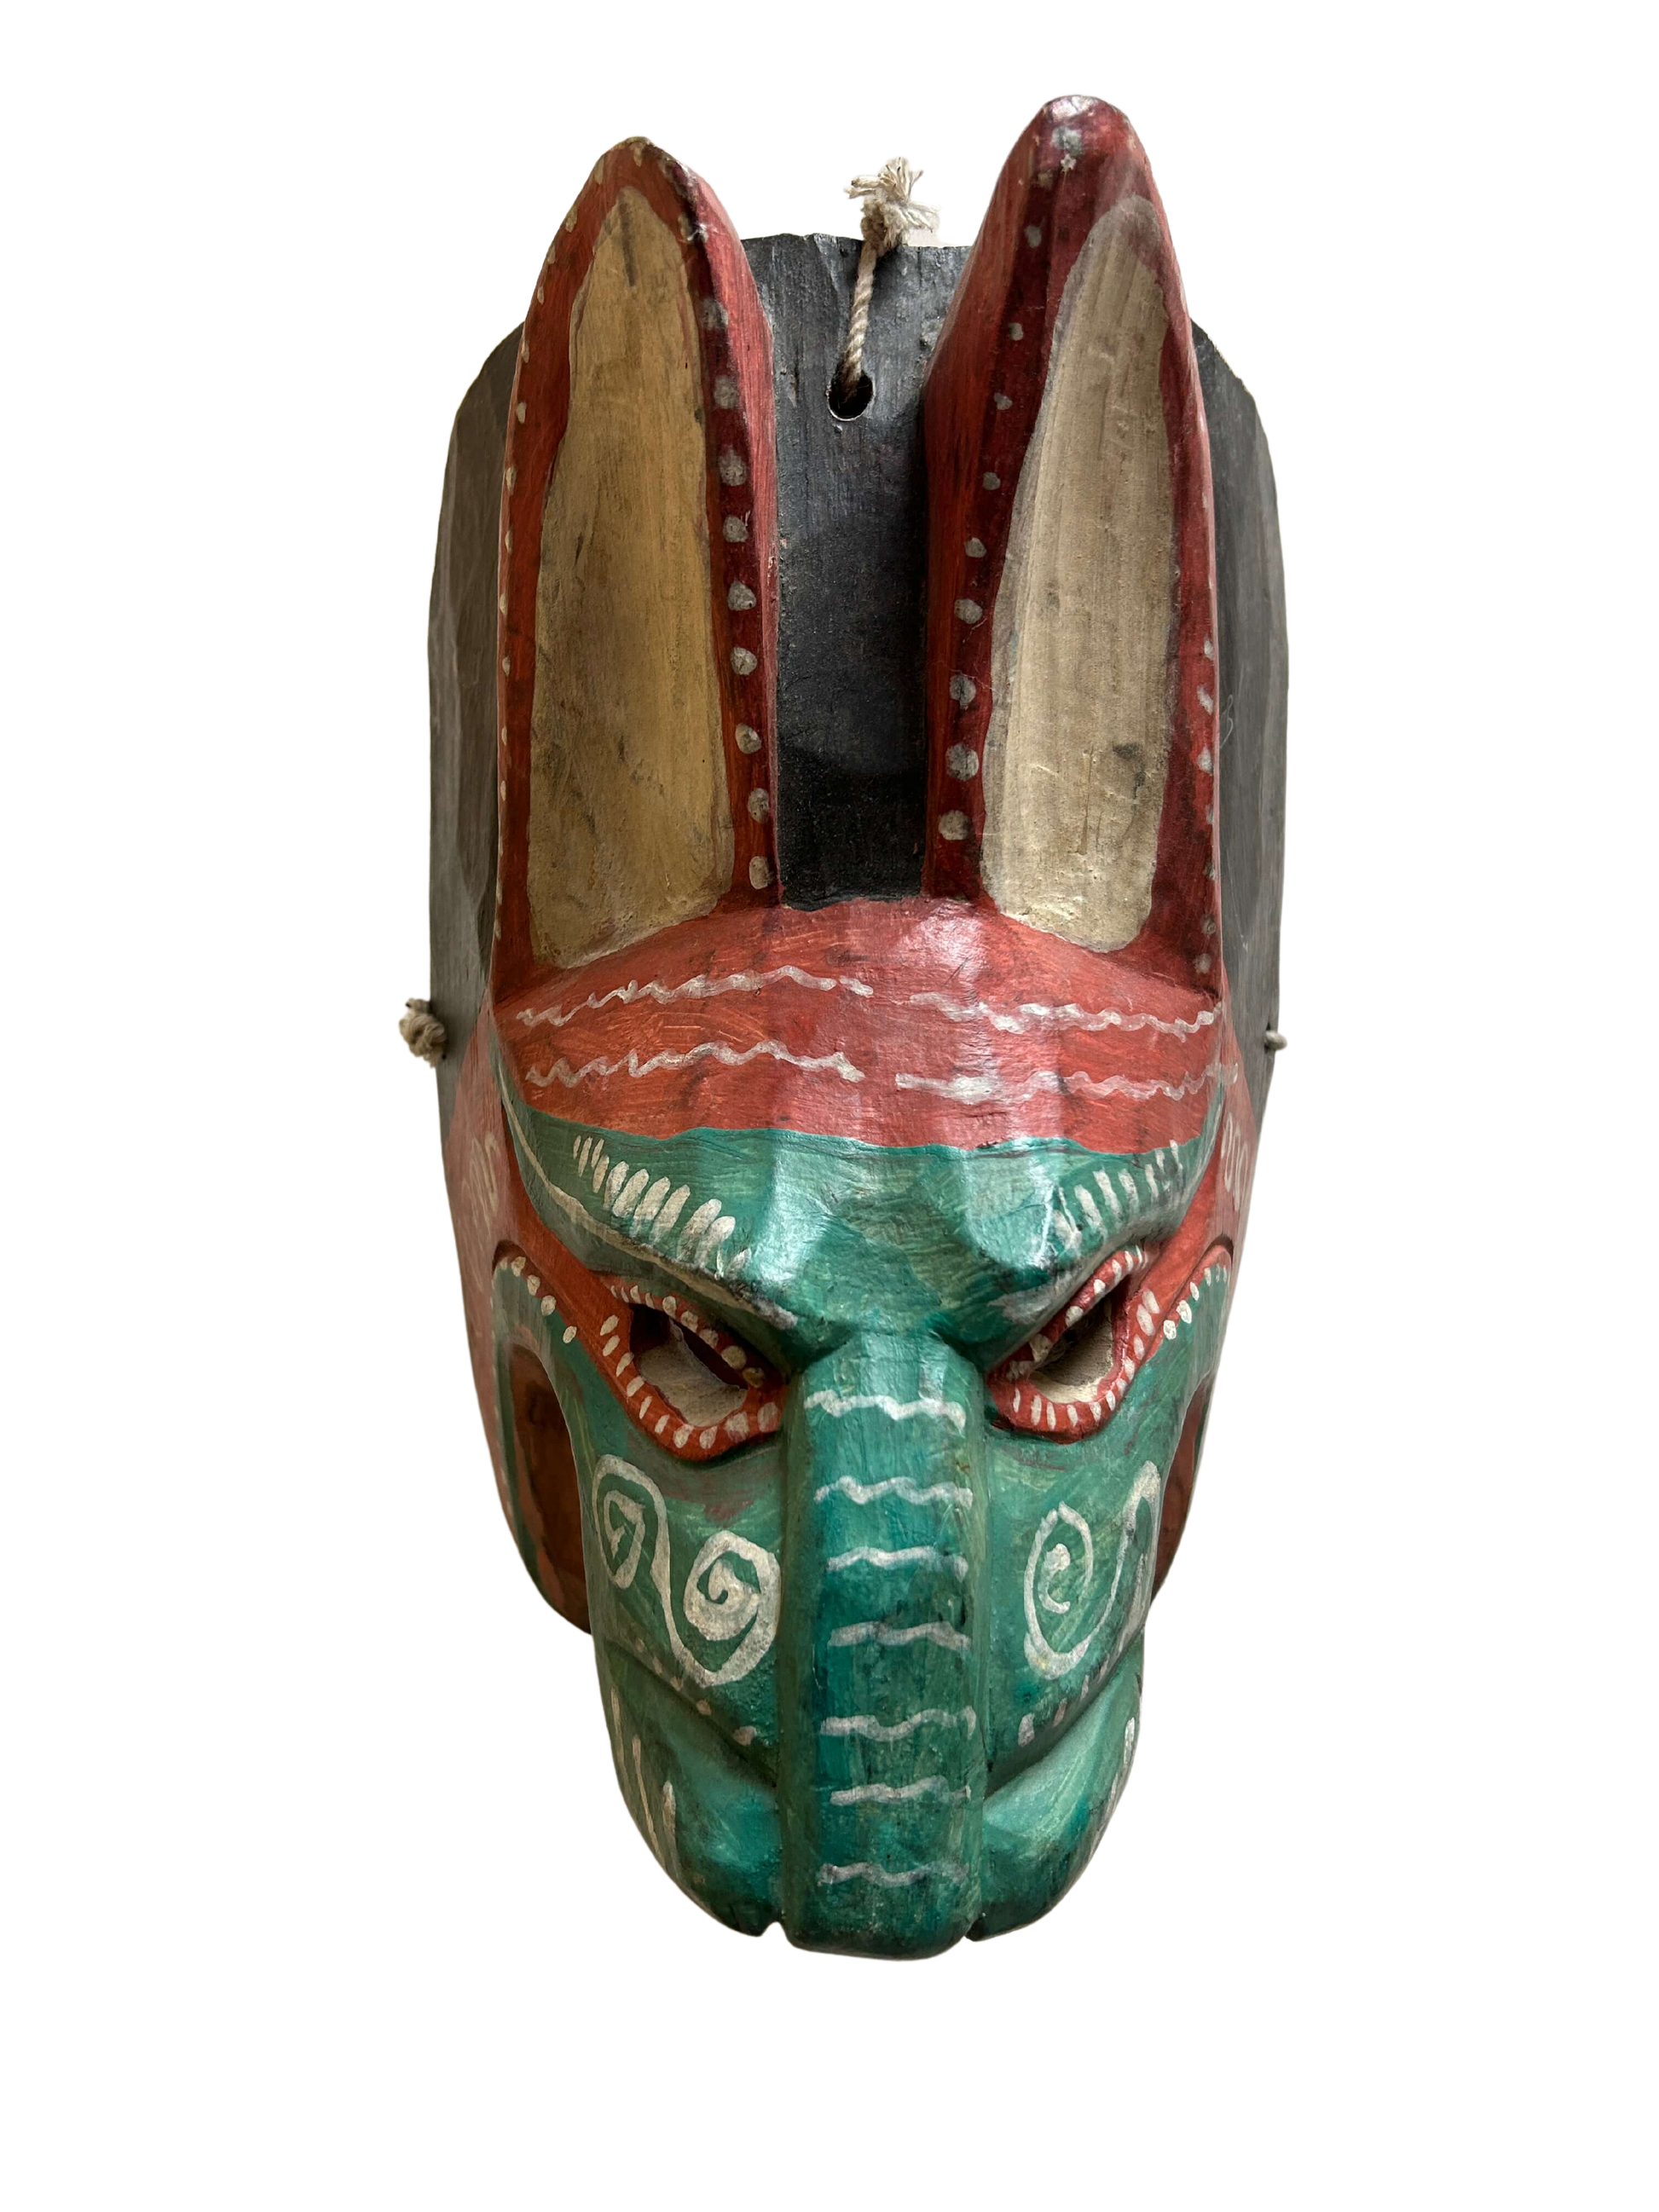 This wood-crafted Art Mask, brilliantly melding metal and wood with bronze and titanium accents, functions as both a fashion accessory and an emblem of artistic expression; its handle enhances its allure, making it a treasured addition for collectors and art enthusiasts, available at the hearing clinic at Allard Audiology.